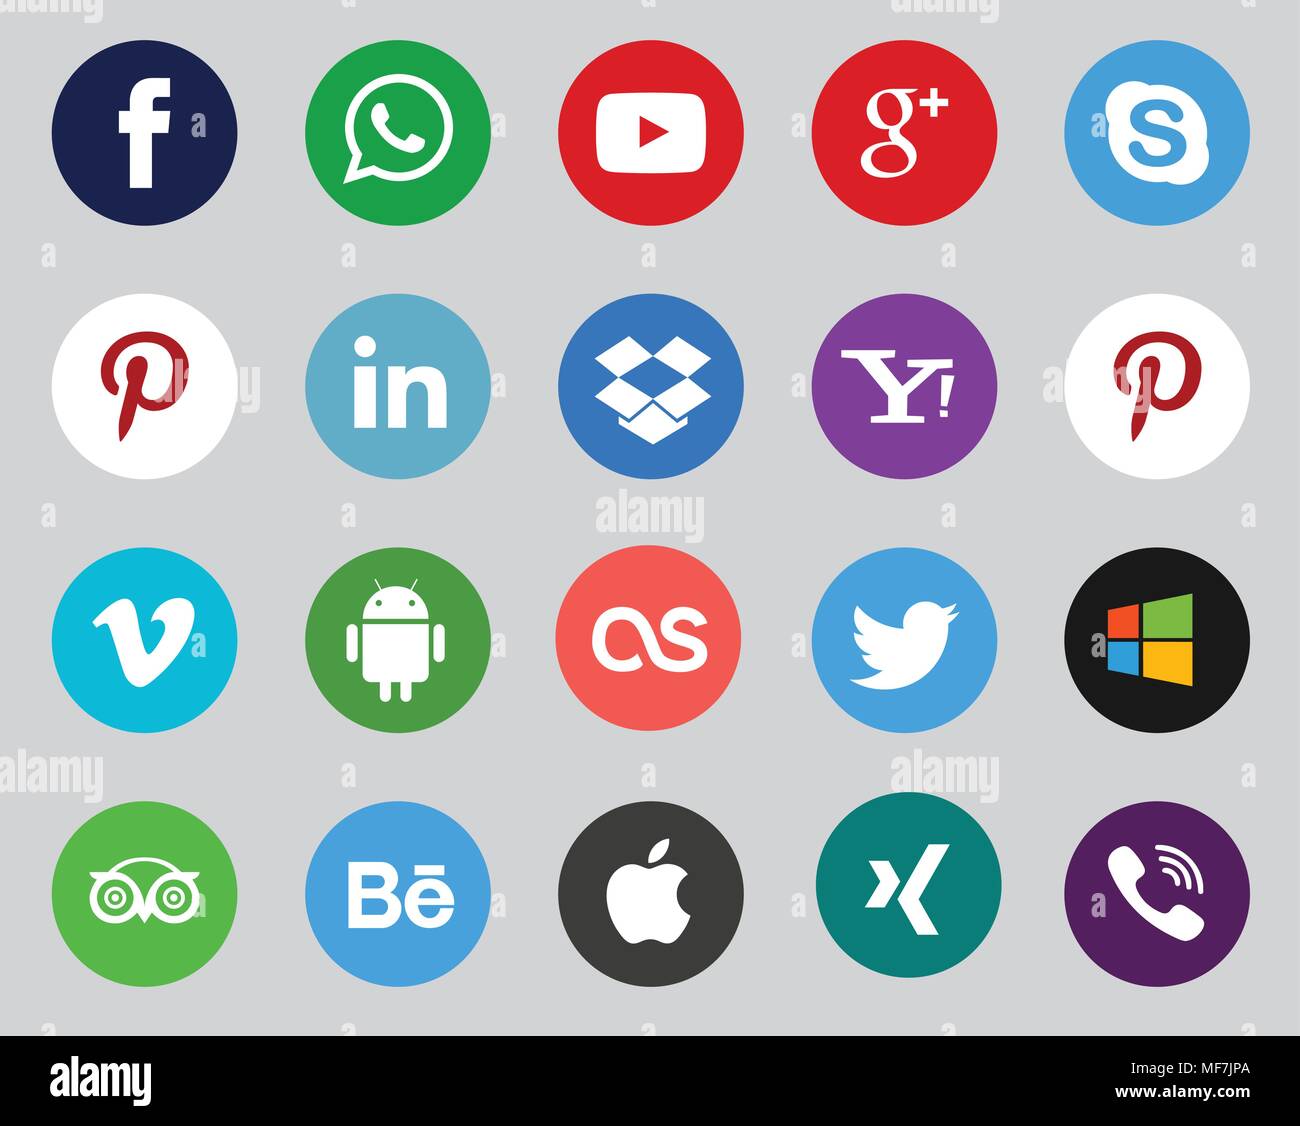 Social media icon collection with different types of web button icon set Stock Vector